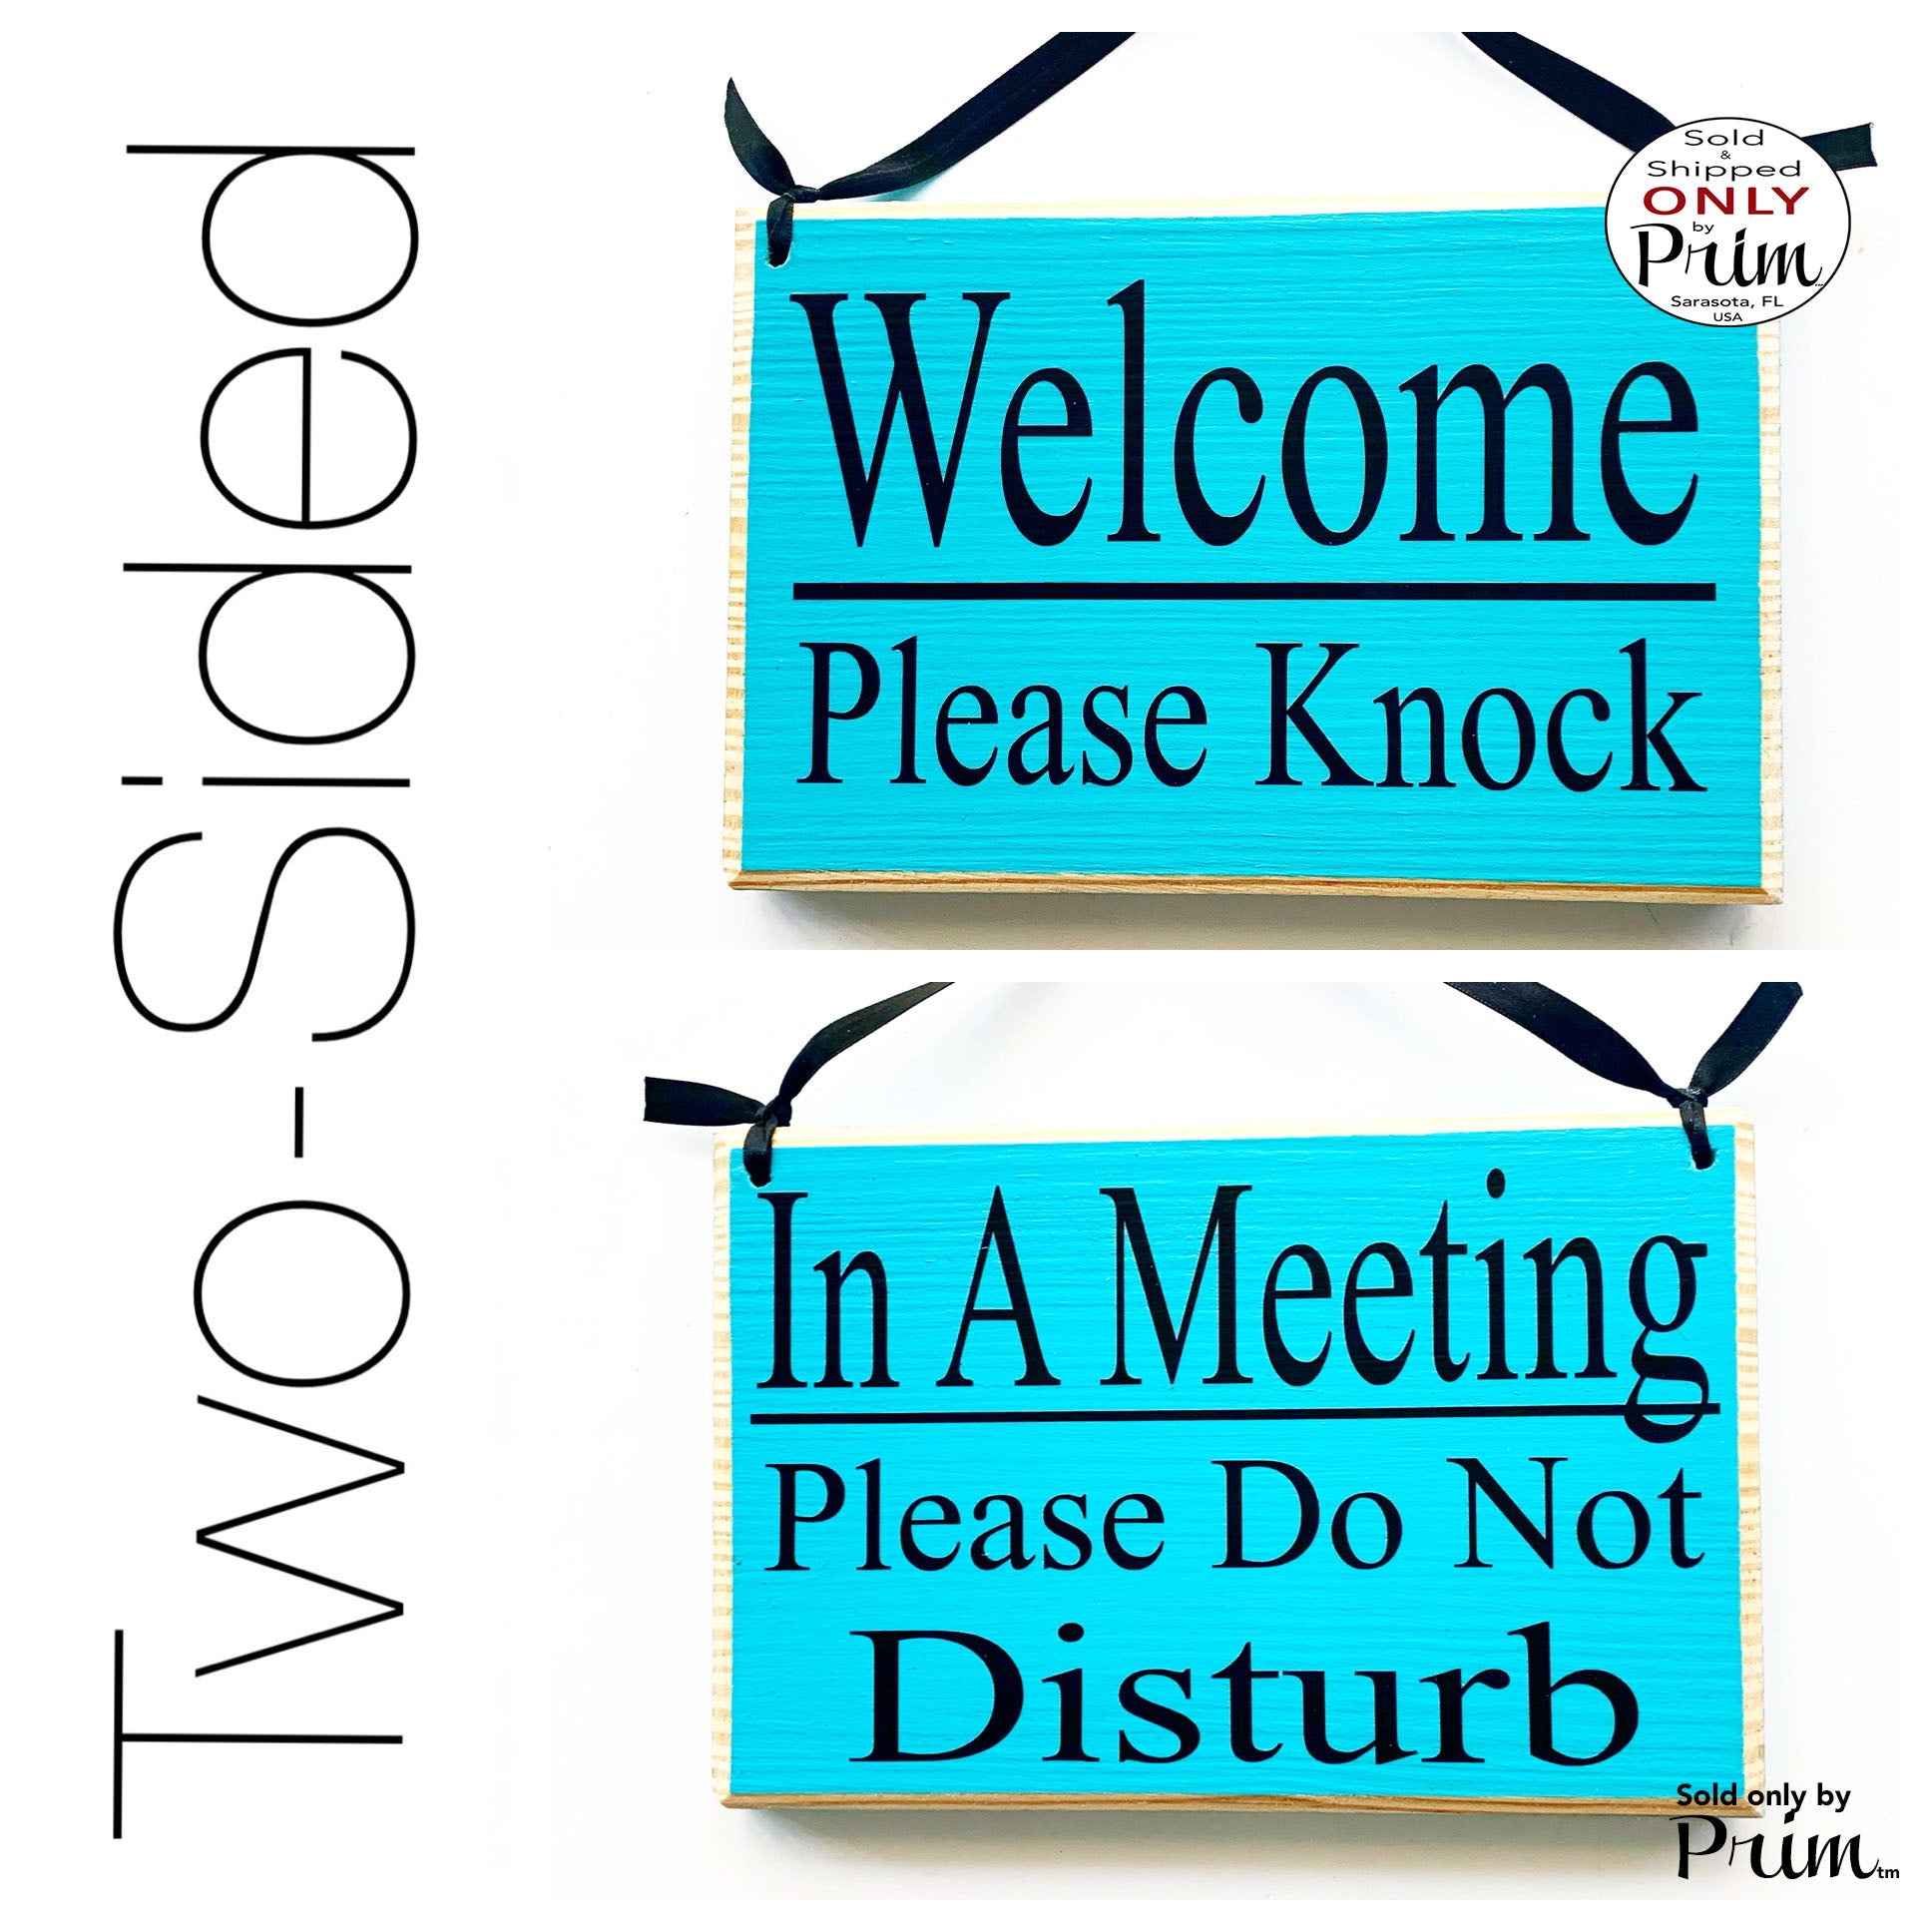 8x6 In a Meeting Please Do Not Disturb / Welcome Please Knock Custom Wood Sign Office Spa Salon In Session Busy Two-Sided Door Plaque Designs by Prim